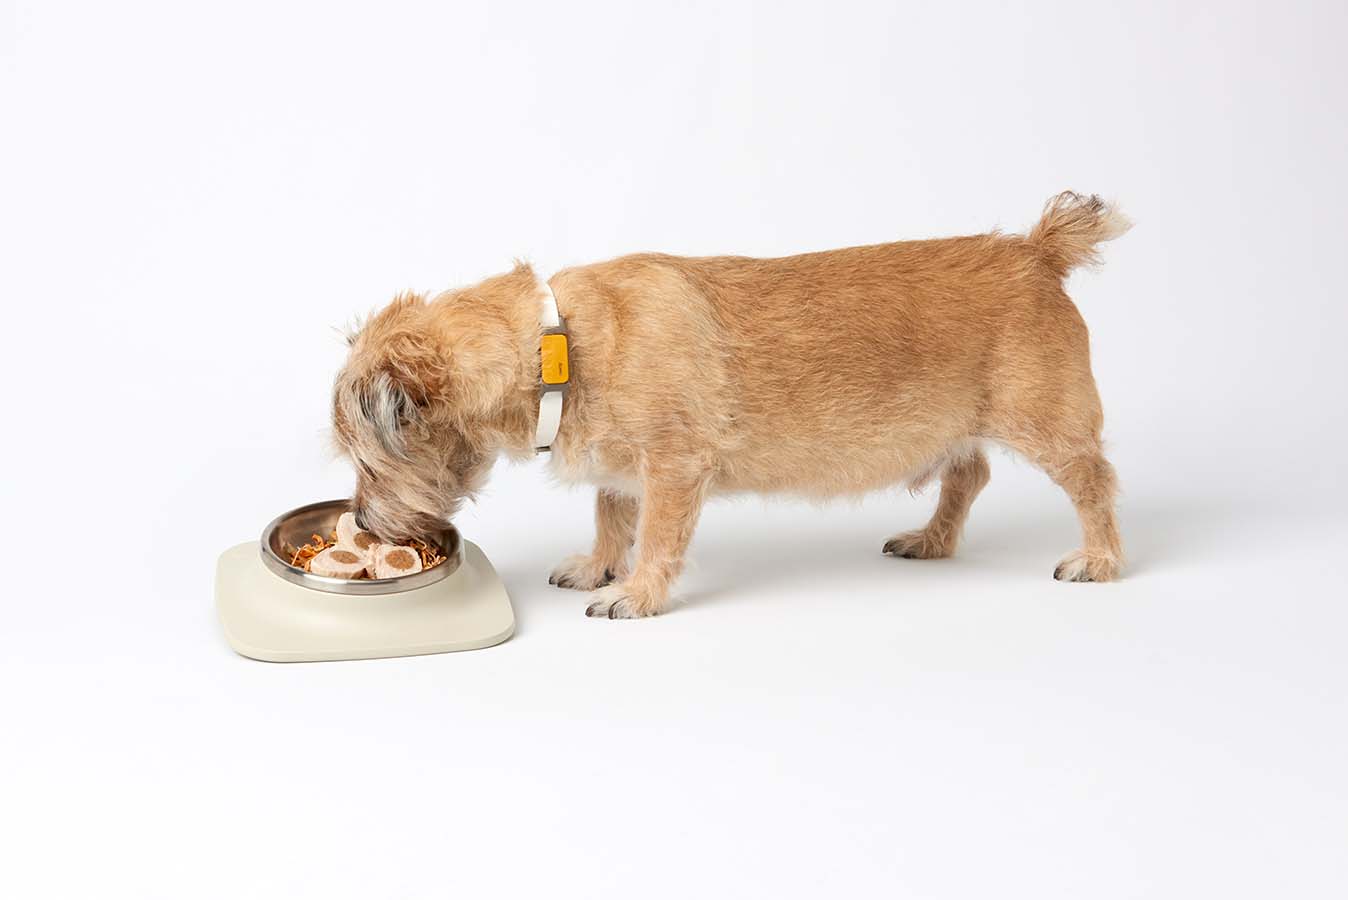 A picture of a small dog wearing the tracker, eating from the bowl.